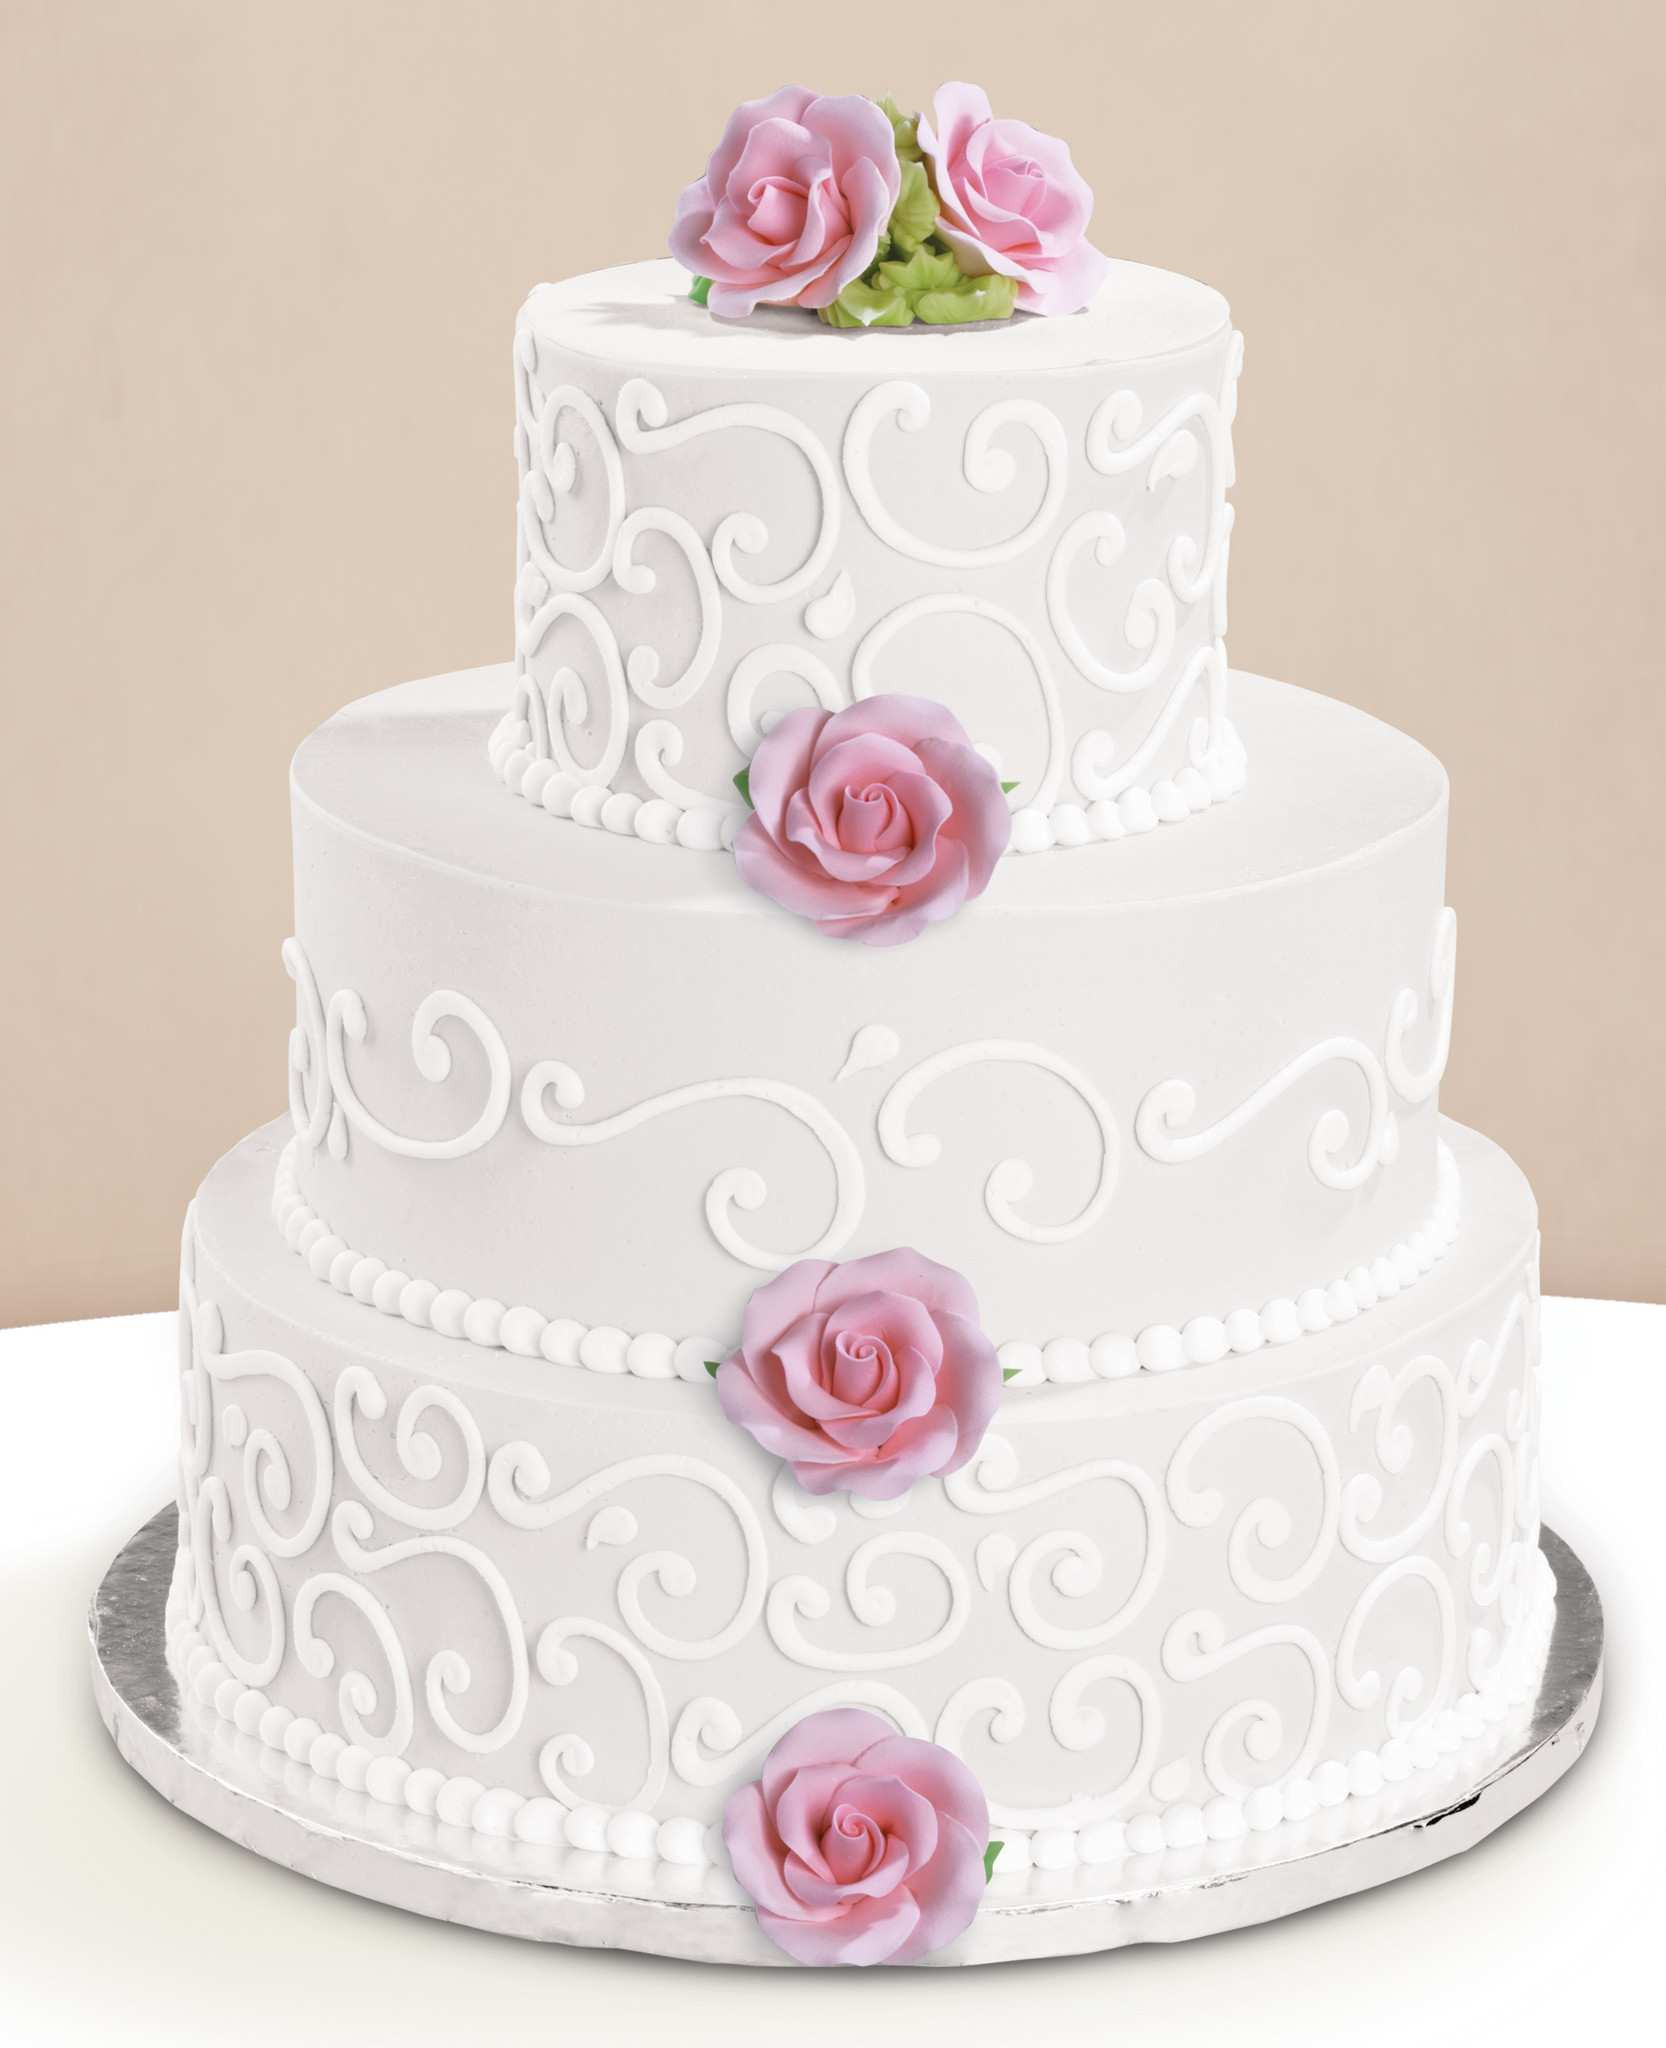 The Best Ideas for Walmart Wedding Cakes Catalog Home, Family, Style